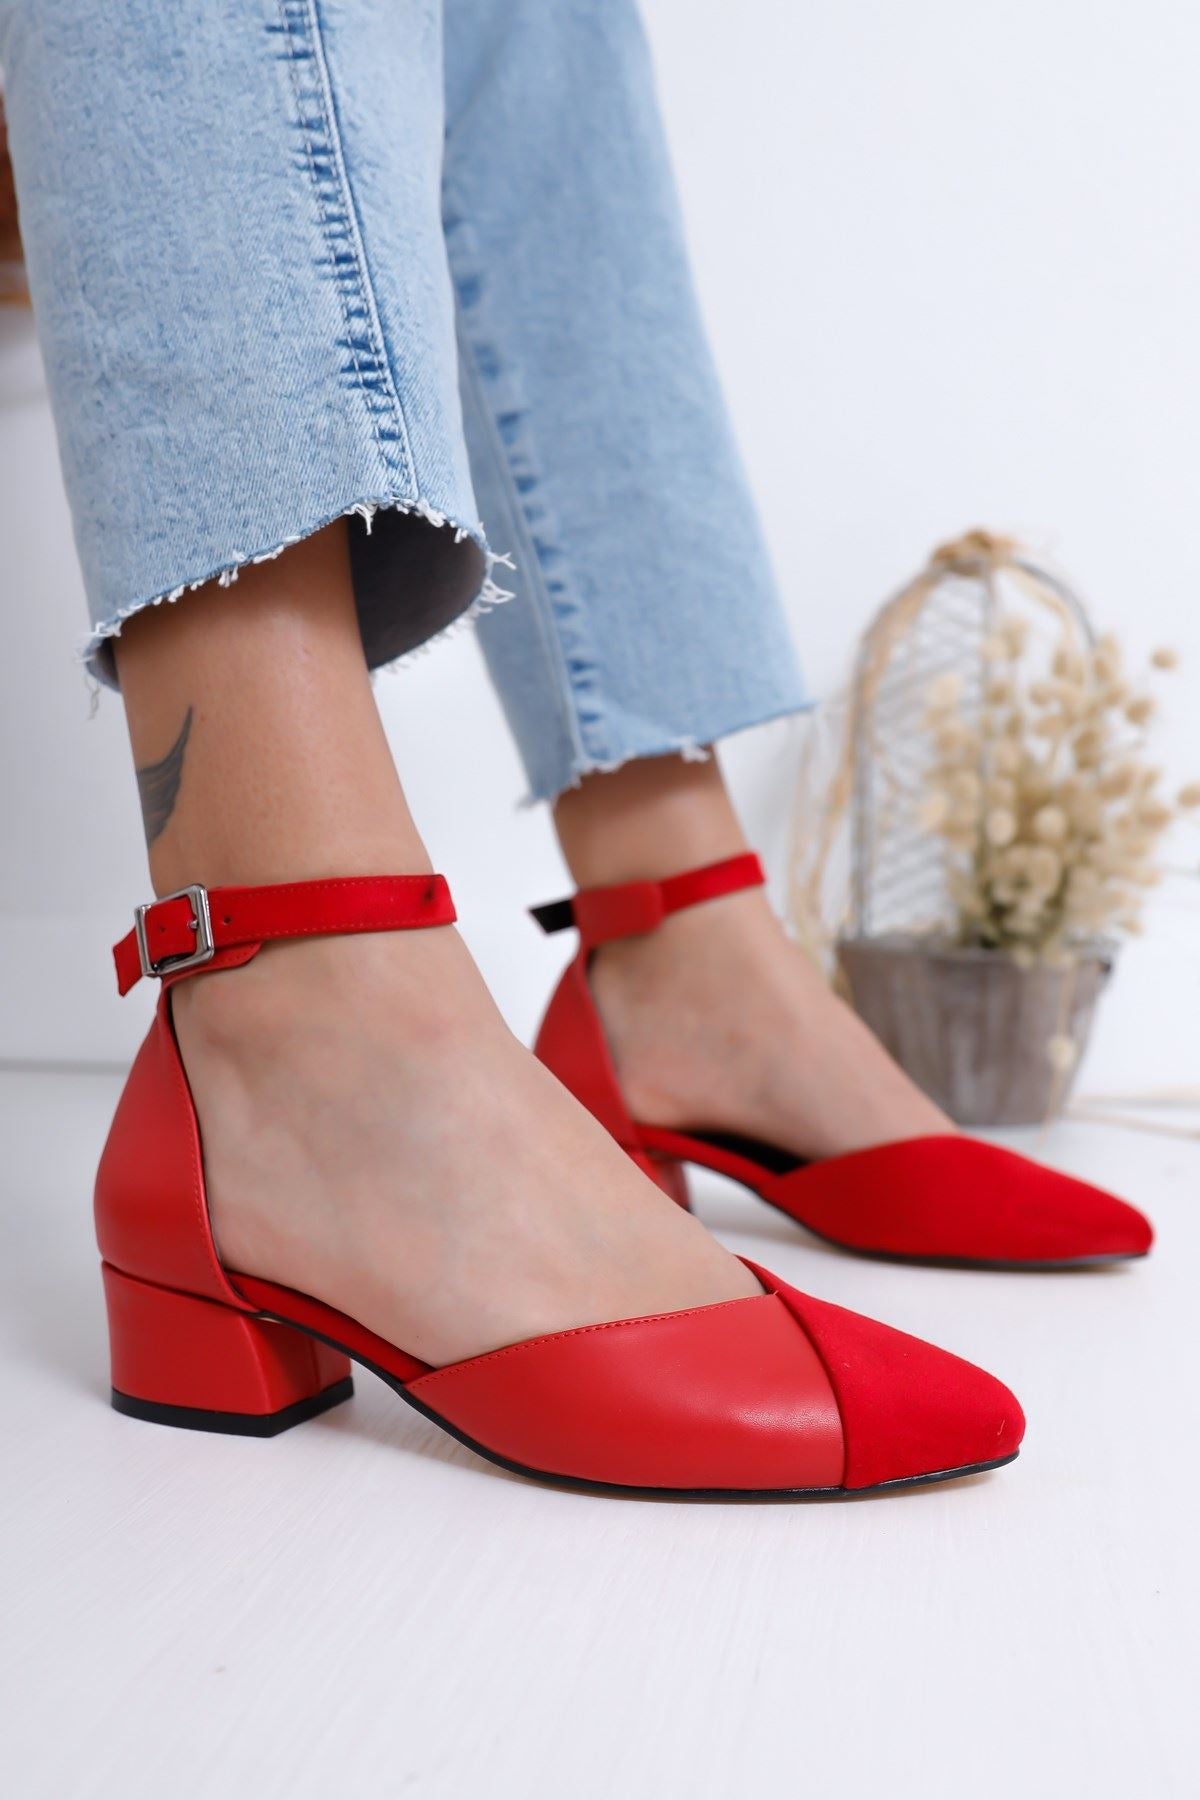 Women's Holly Heels Red Skin-Suede Shoes - STREETMODE™